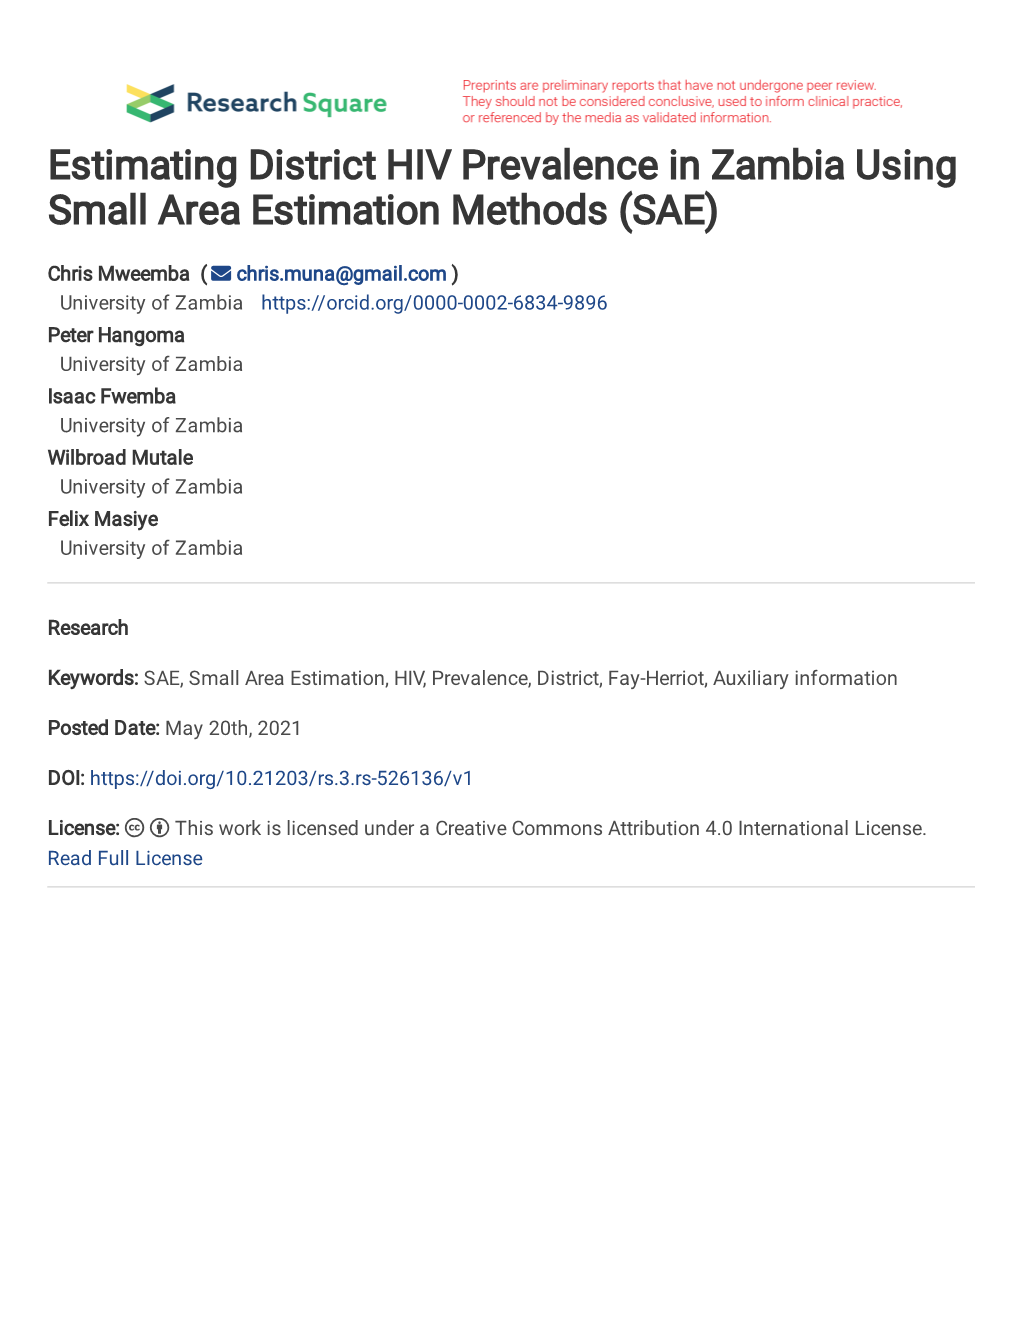 Estimating District HIV Prevalence in Zambia Using Small Area Estimation Methods (SAE)